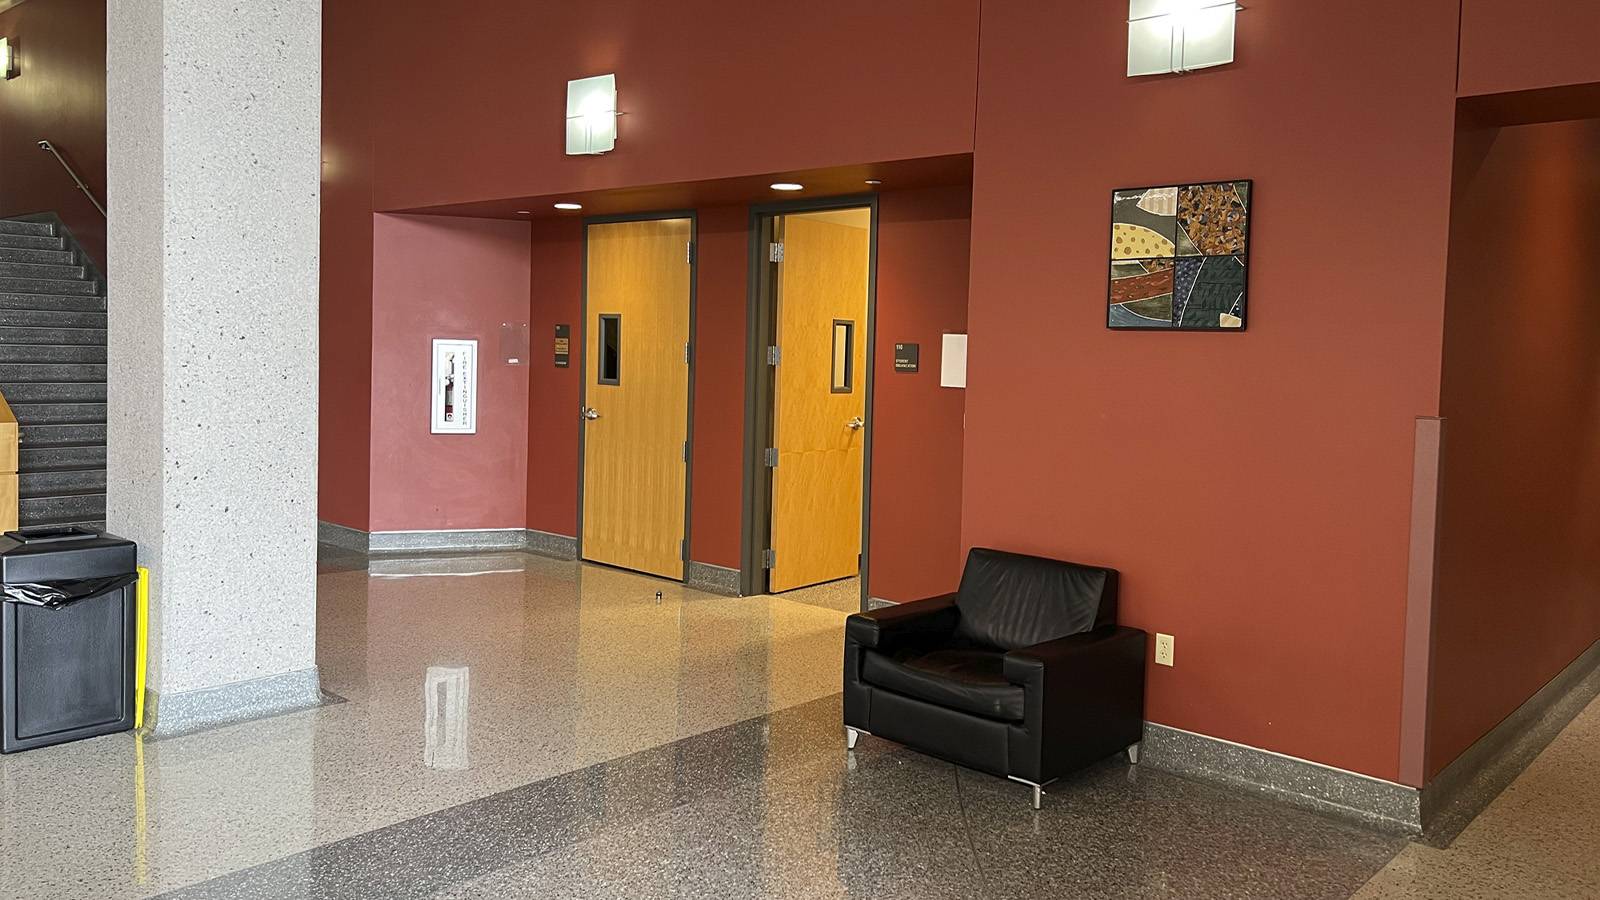 Lobby entrance to rooms 110 and 111 in McCoy Hall